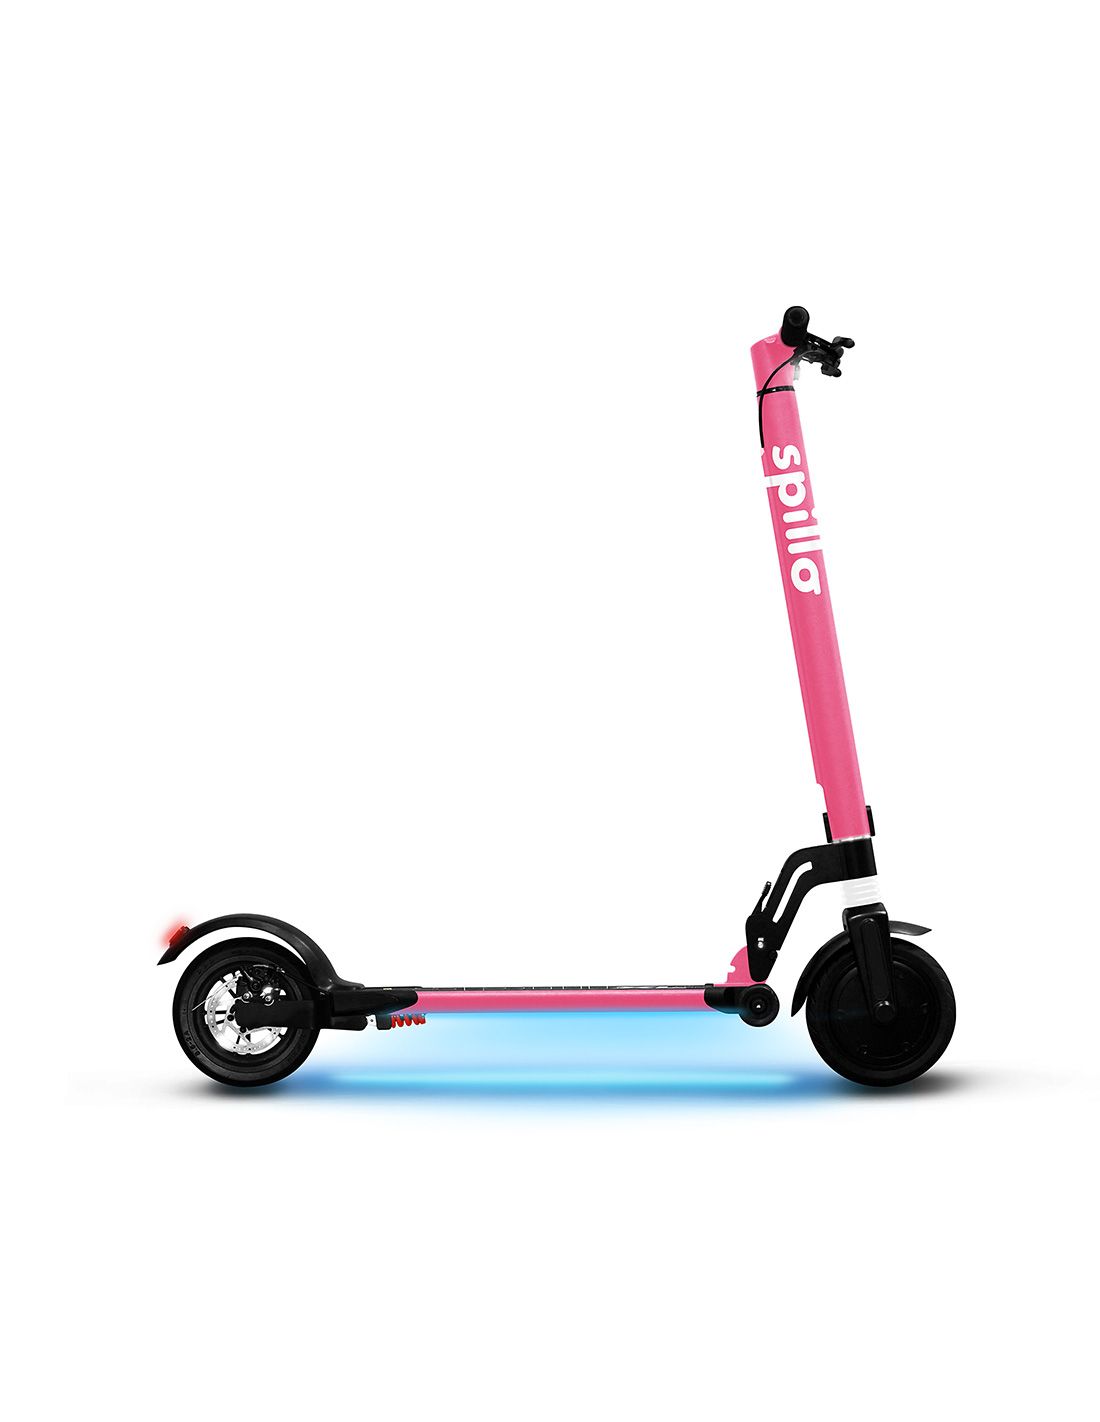 – PRO 500W ONE Pink XL The Elettrico Spillo Scooter